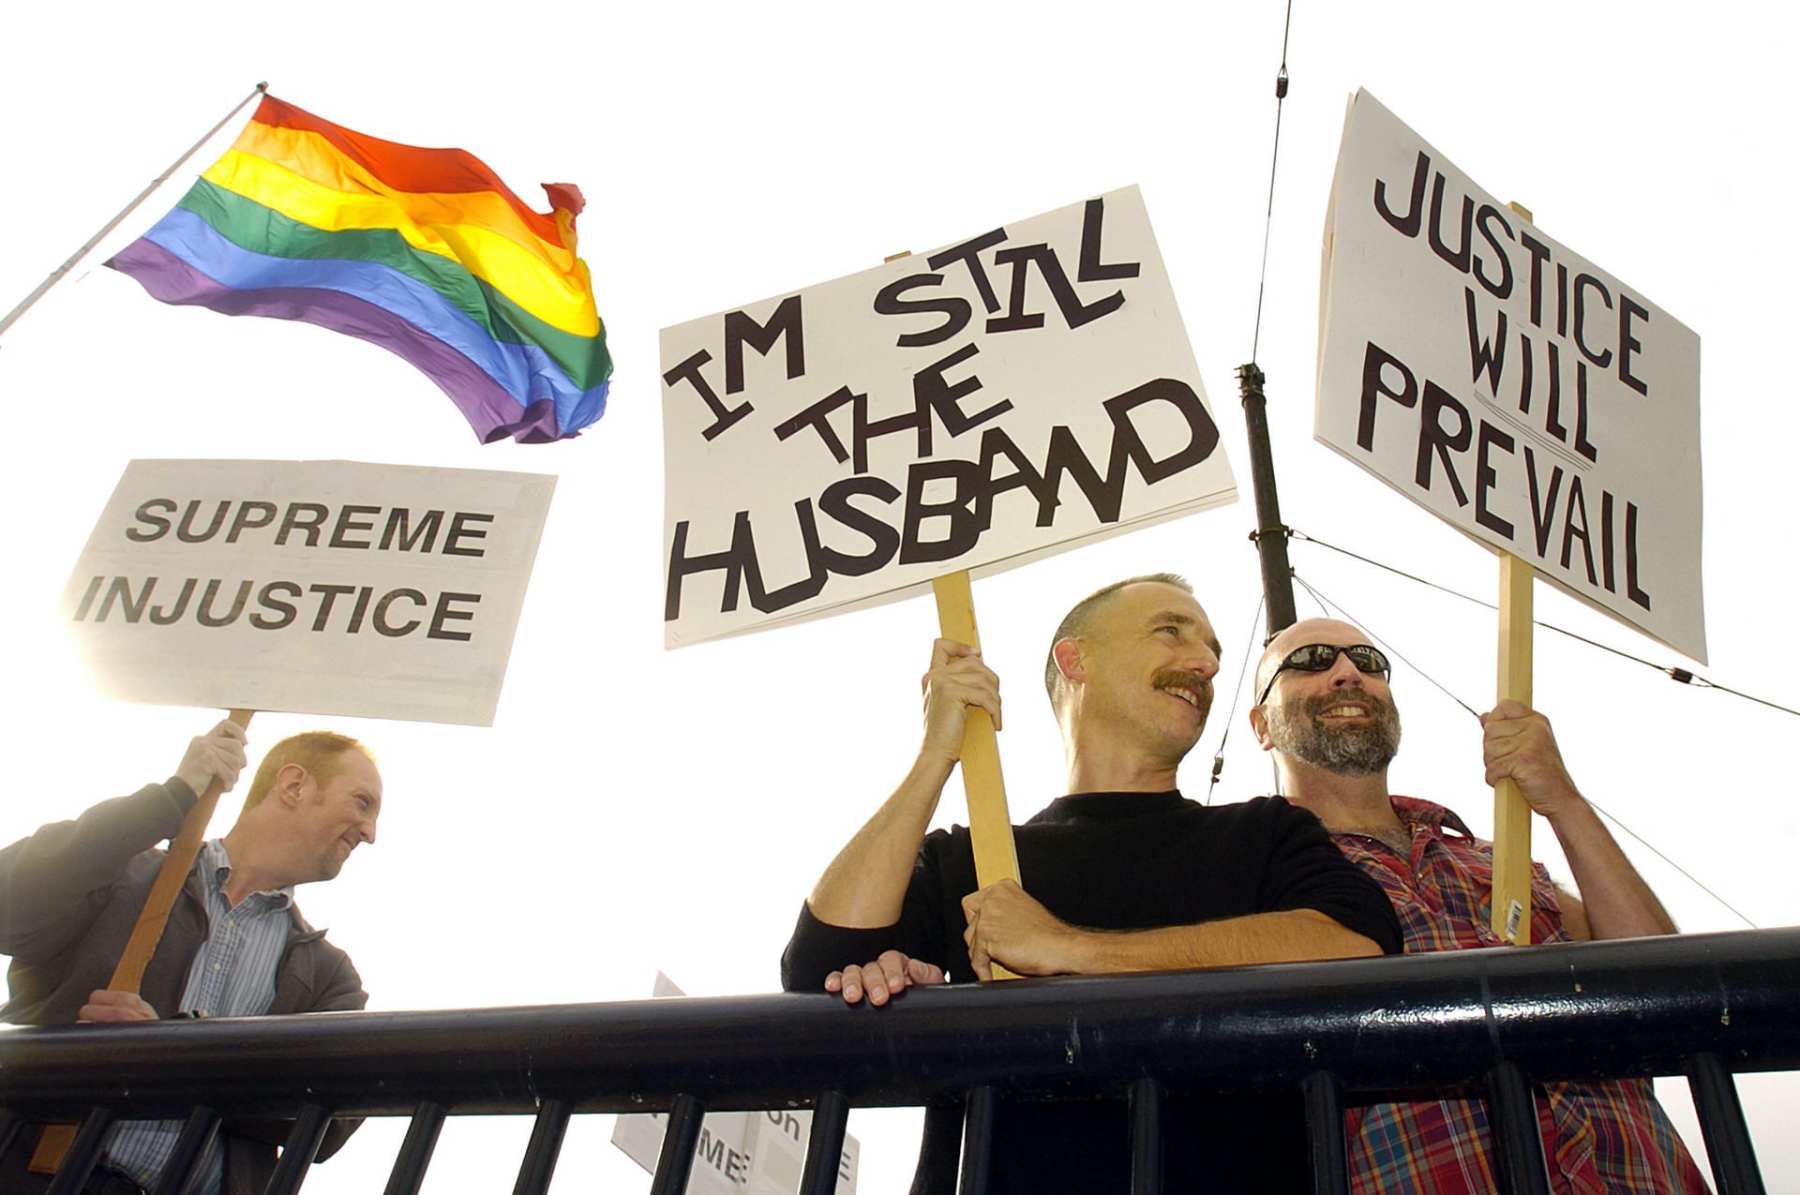 Three people stand with signs supporting marriage equality as the LGBTQ flag waves in the background.